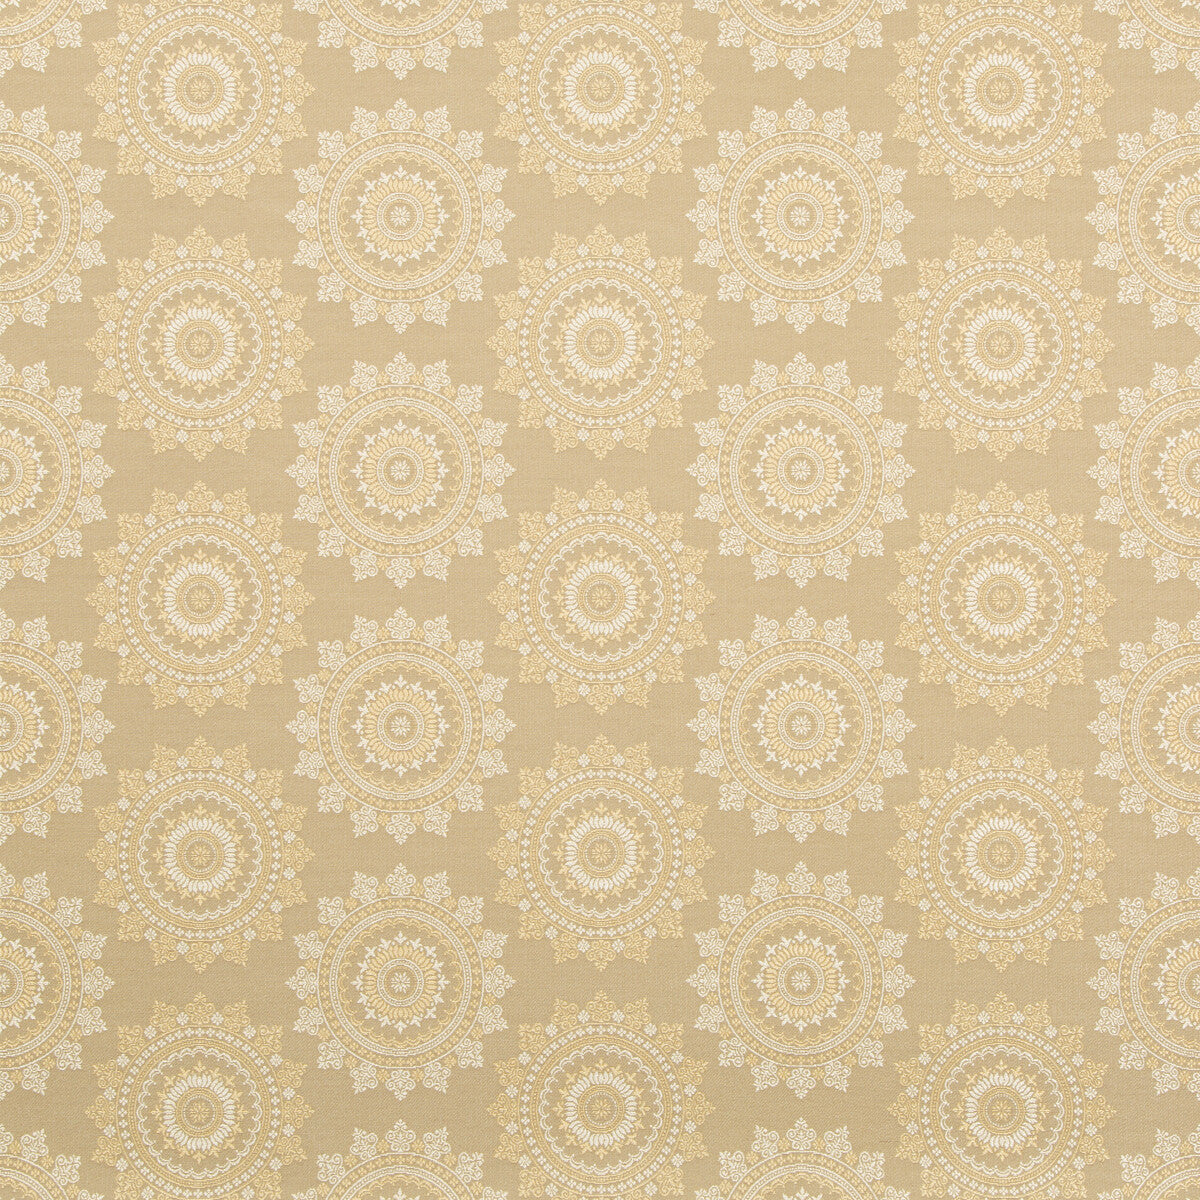 Piatto fabric in wheat color - pattern 35865.1614.0 - by Kravet Contract in the Gis Crypton Green collection